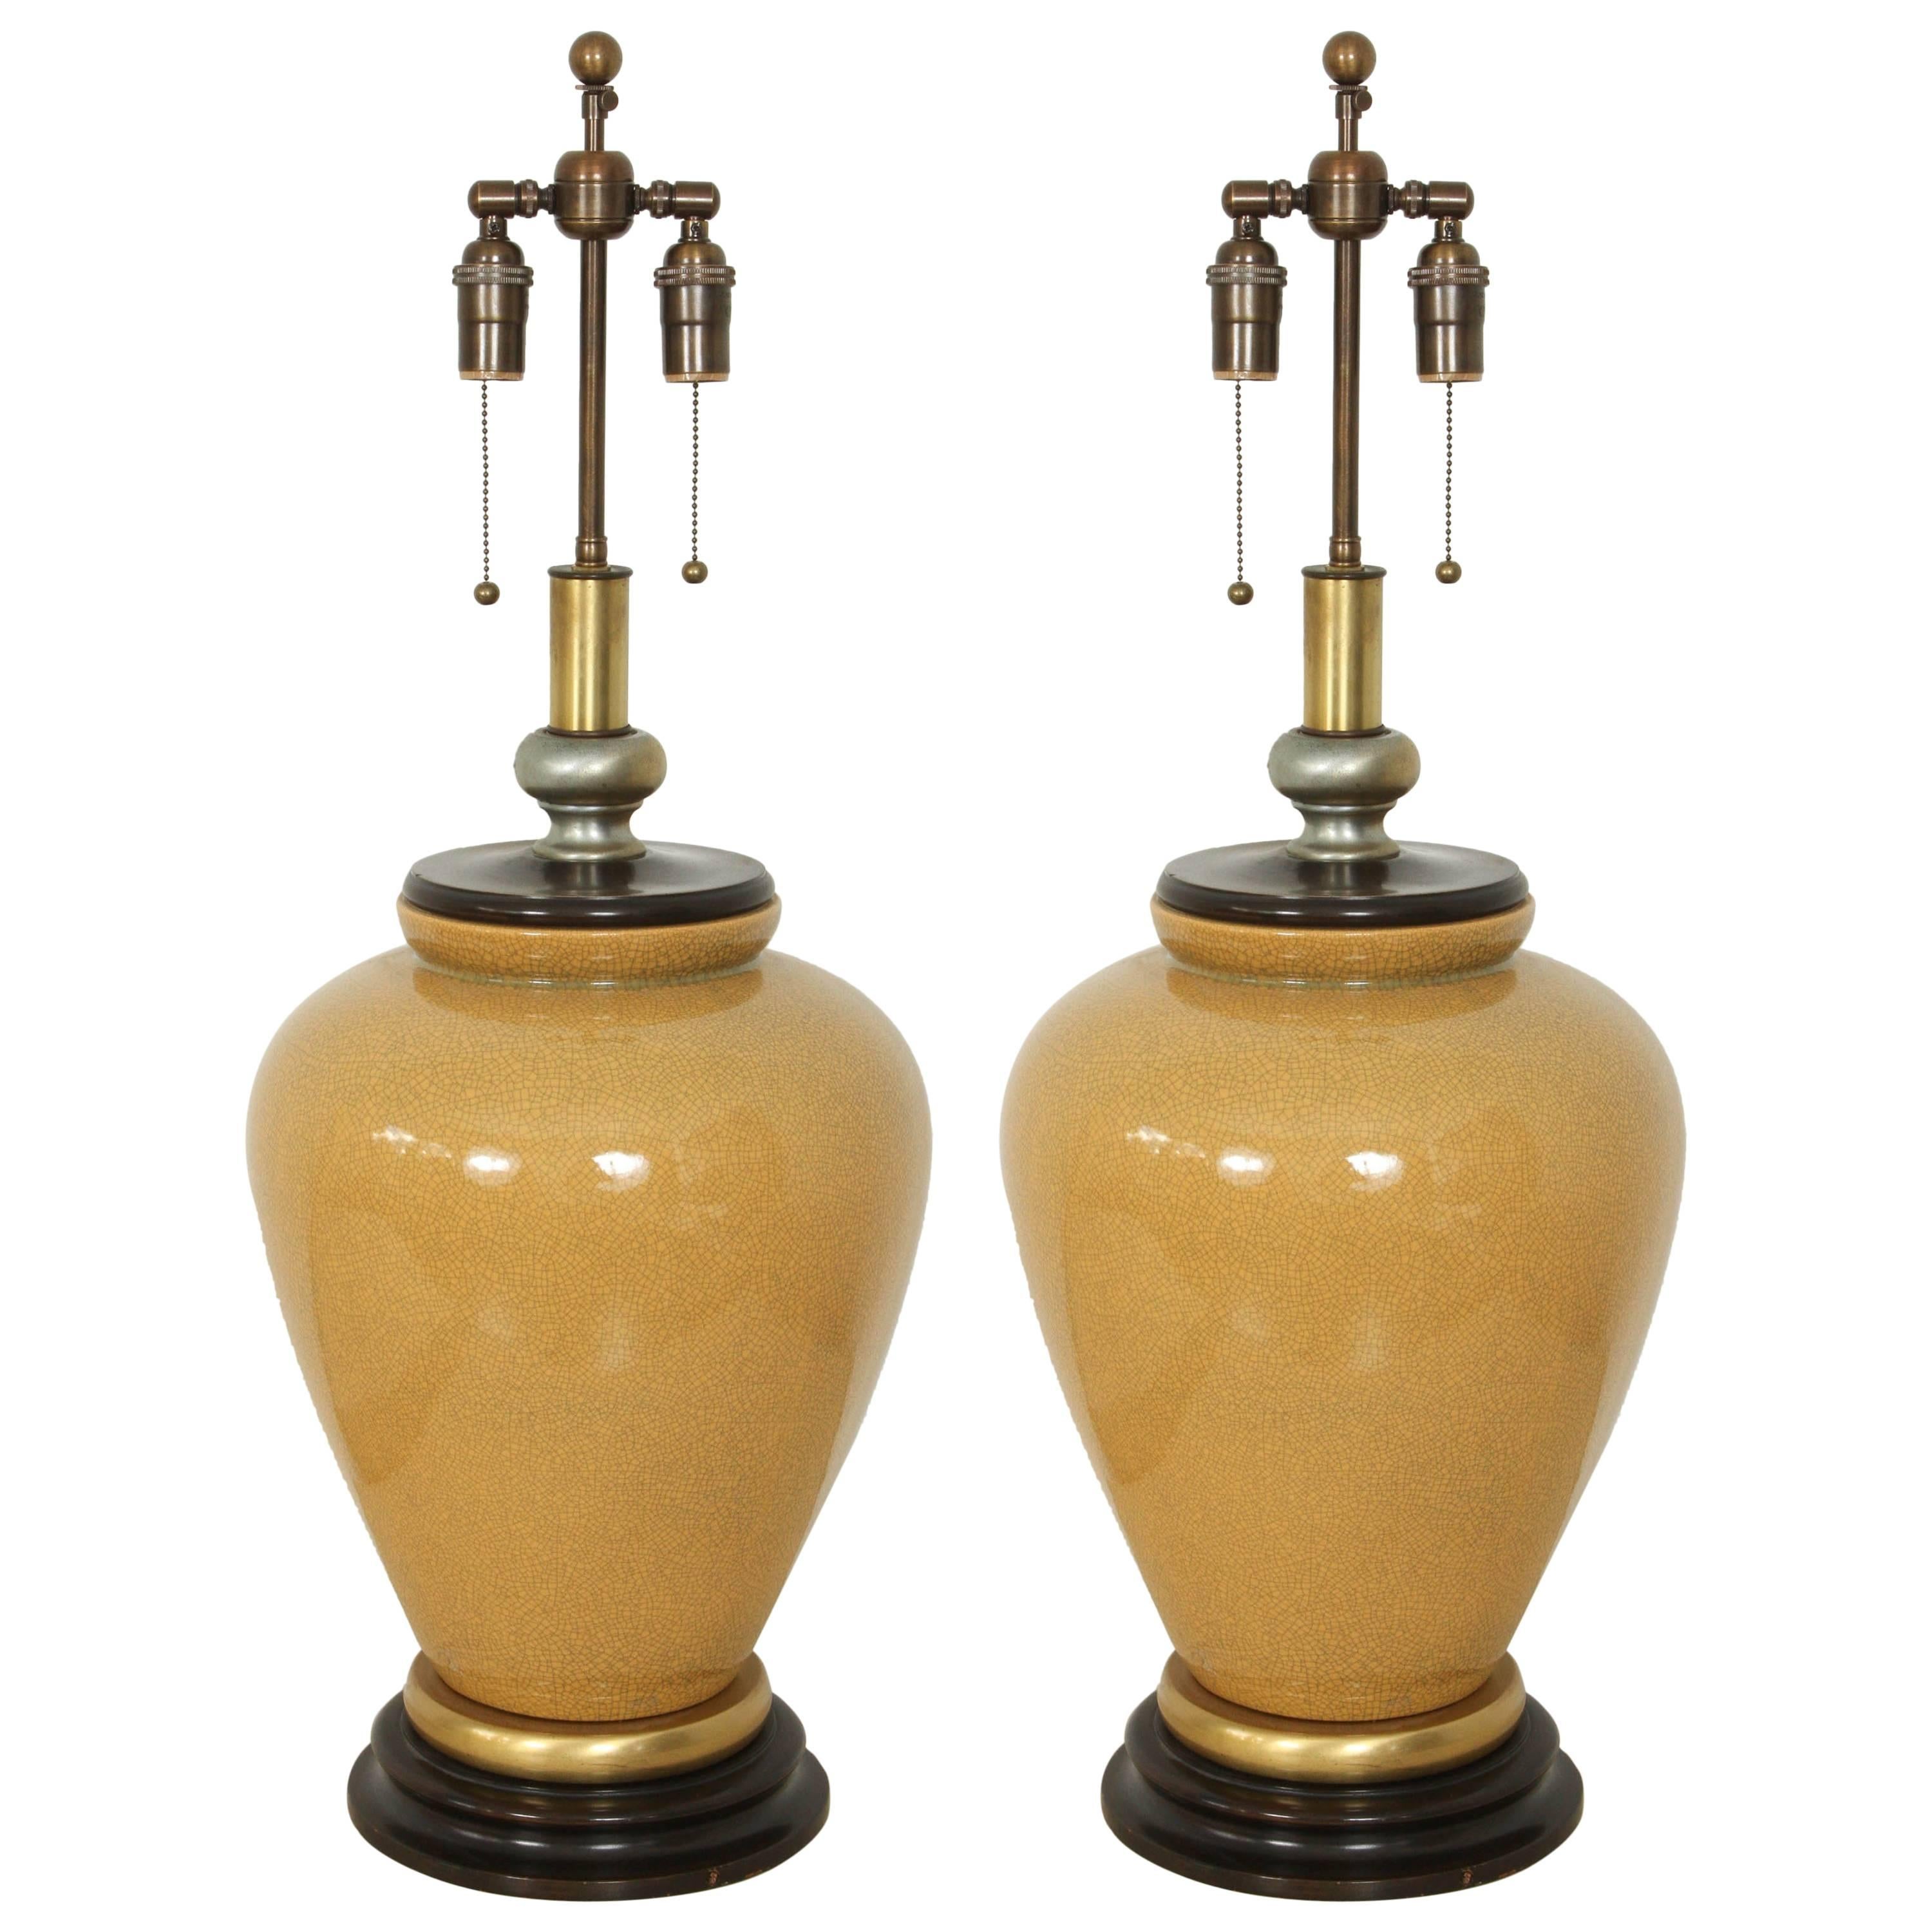 Pair of large ceramic lamps by Frederick Cooper